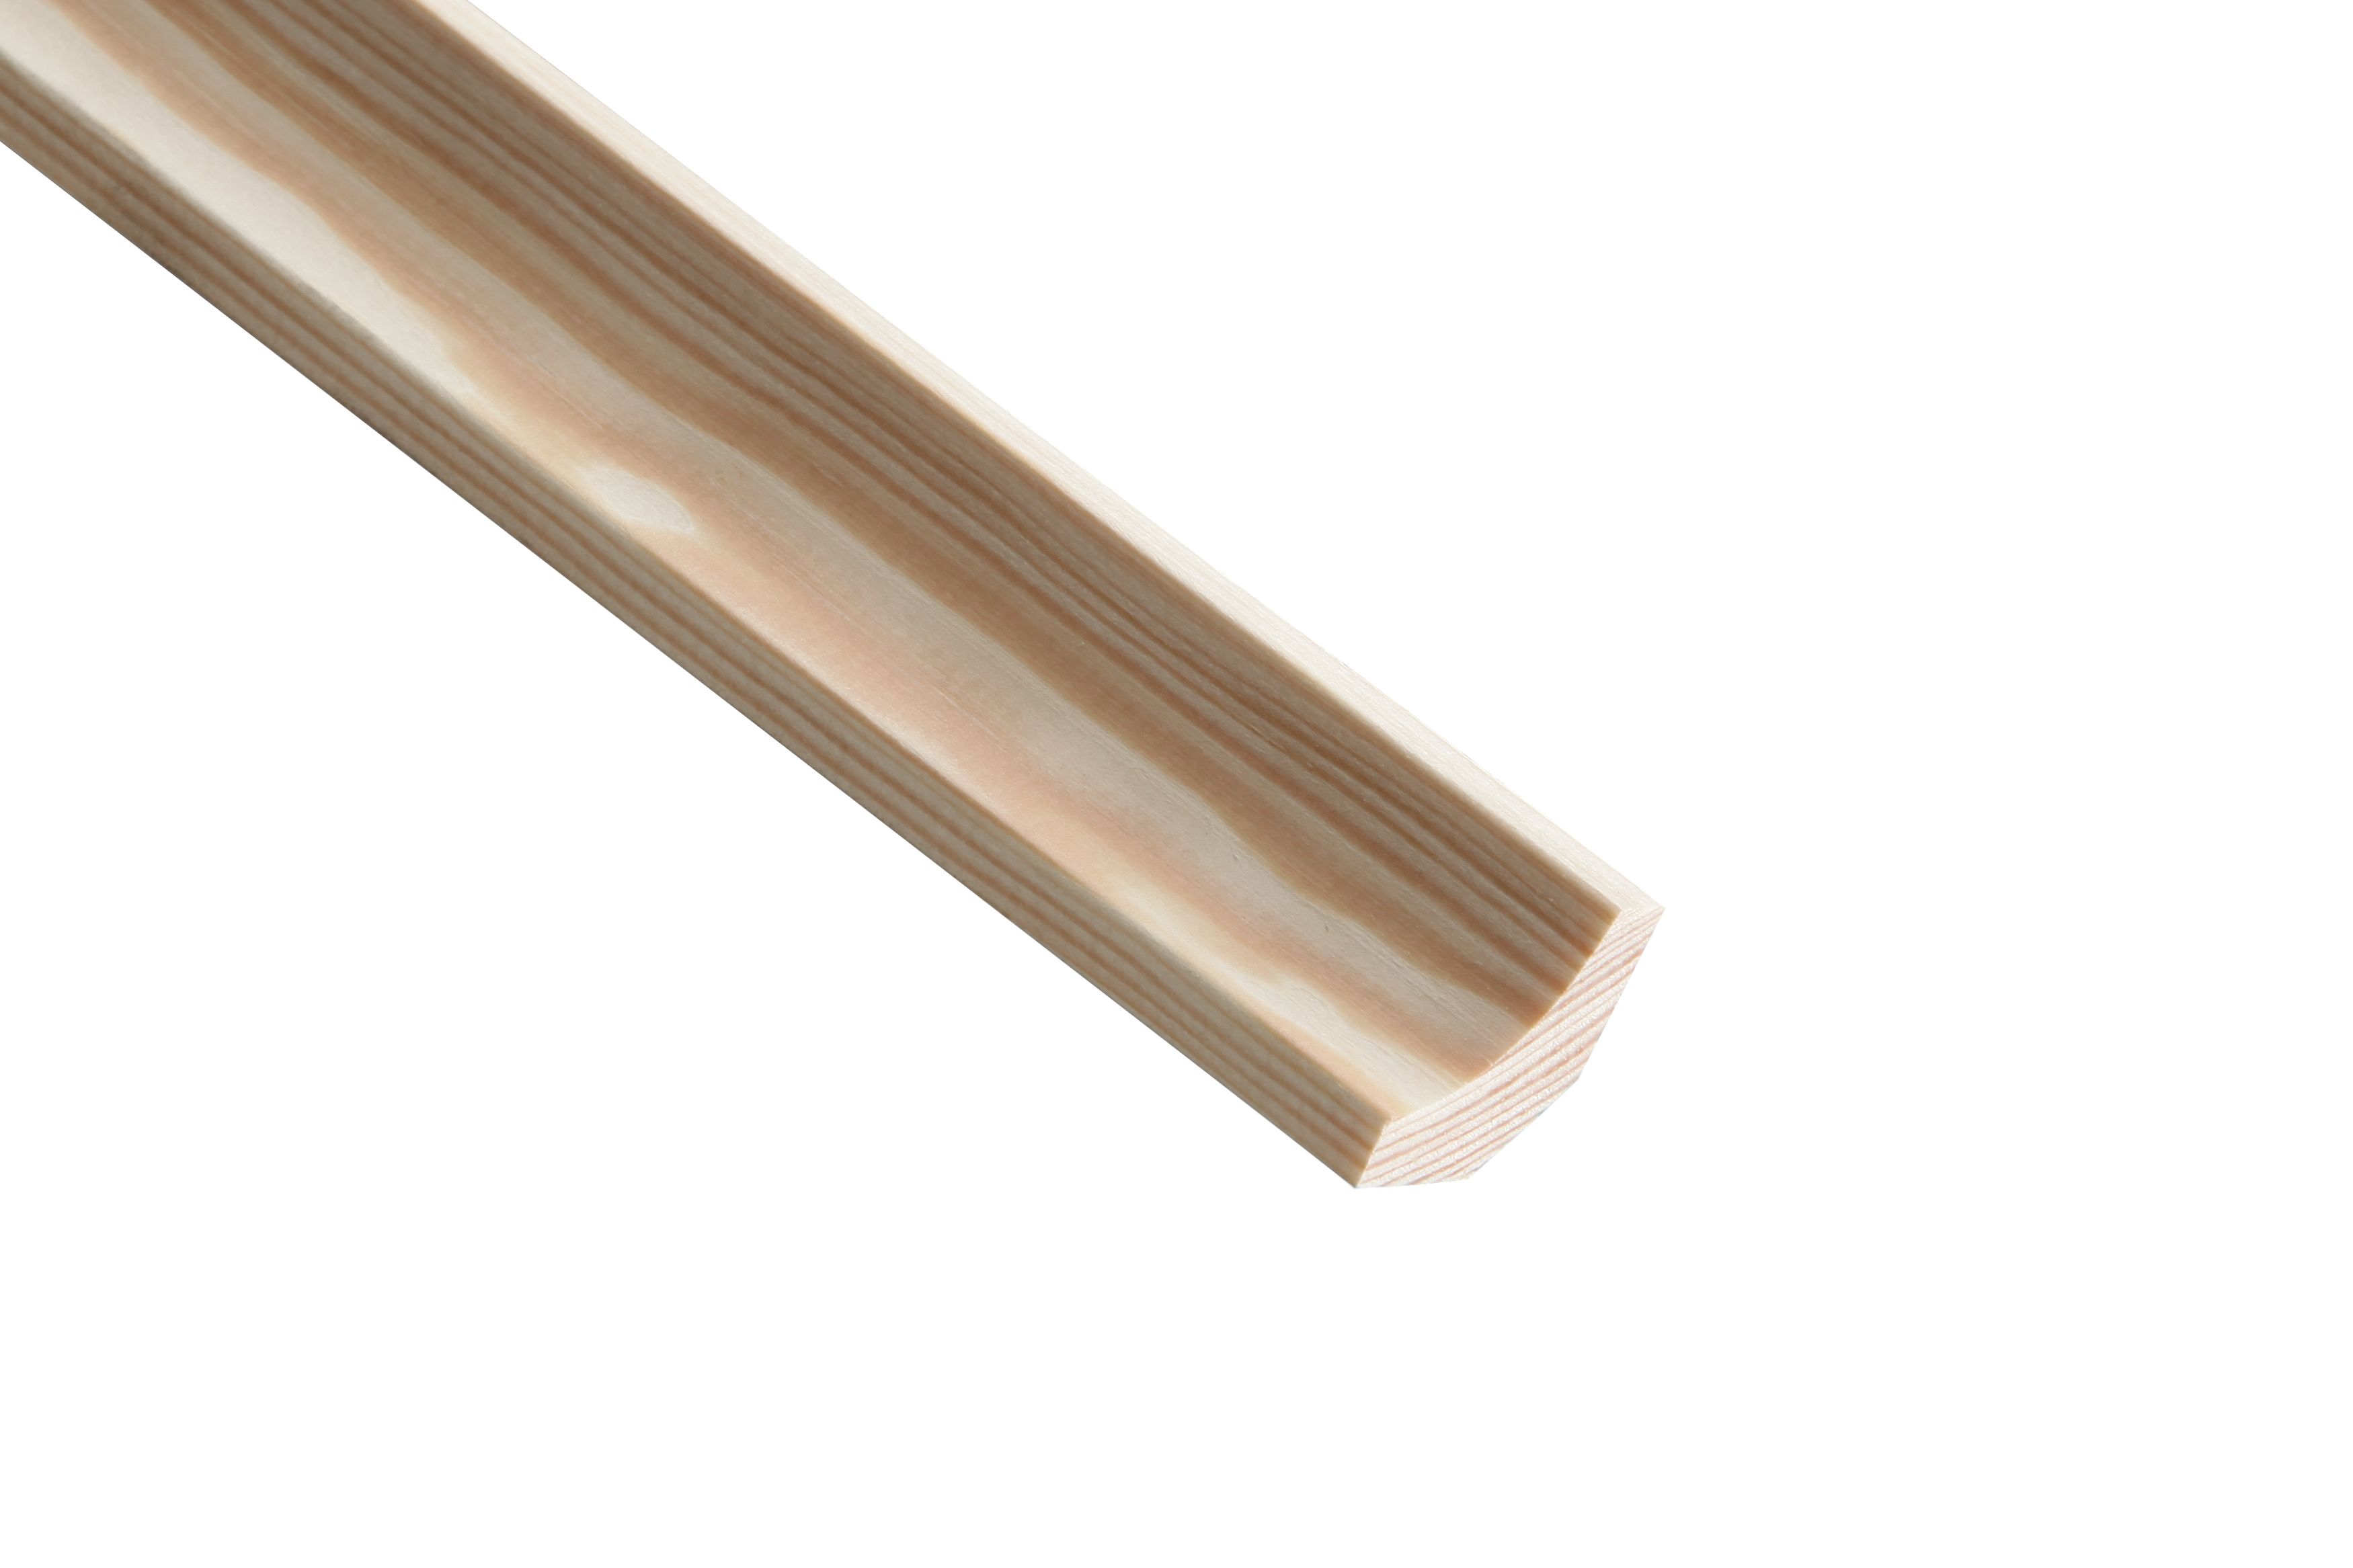 Wickes Pine Scotia Moulding - 21 x 21 x 2400mm